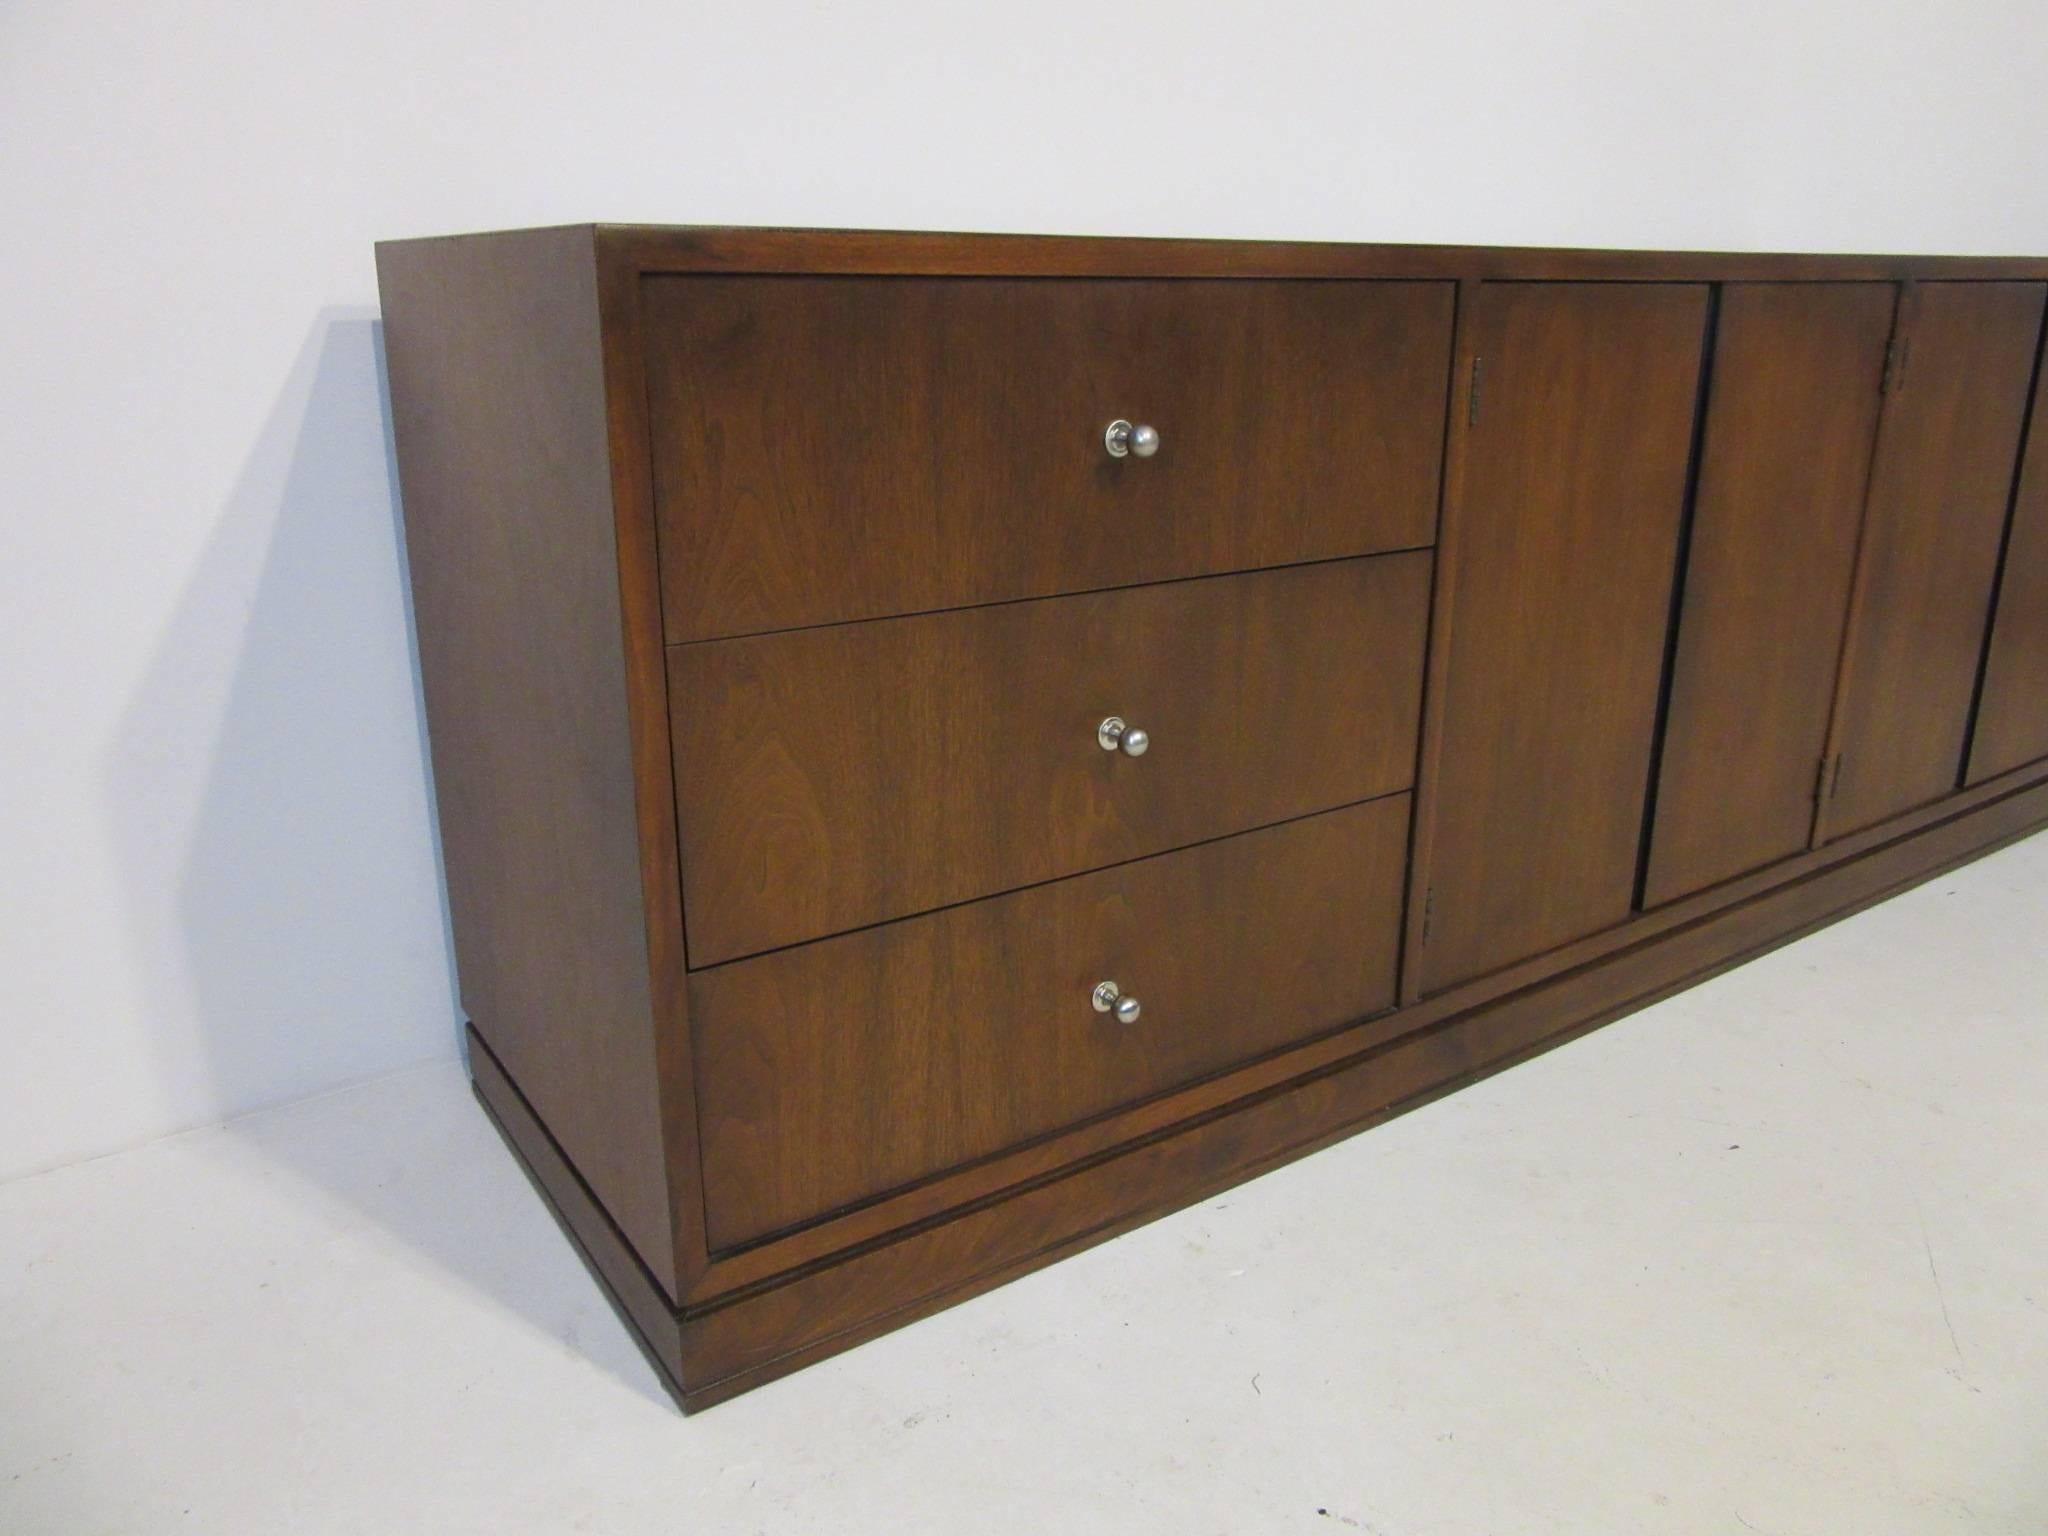 A Mid-Century walnut credenza or sever having three drawers detailed with brushed stainless pulls and four doors each with an adjustable shelve. Designed in the manner of Harvey Probber.